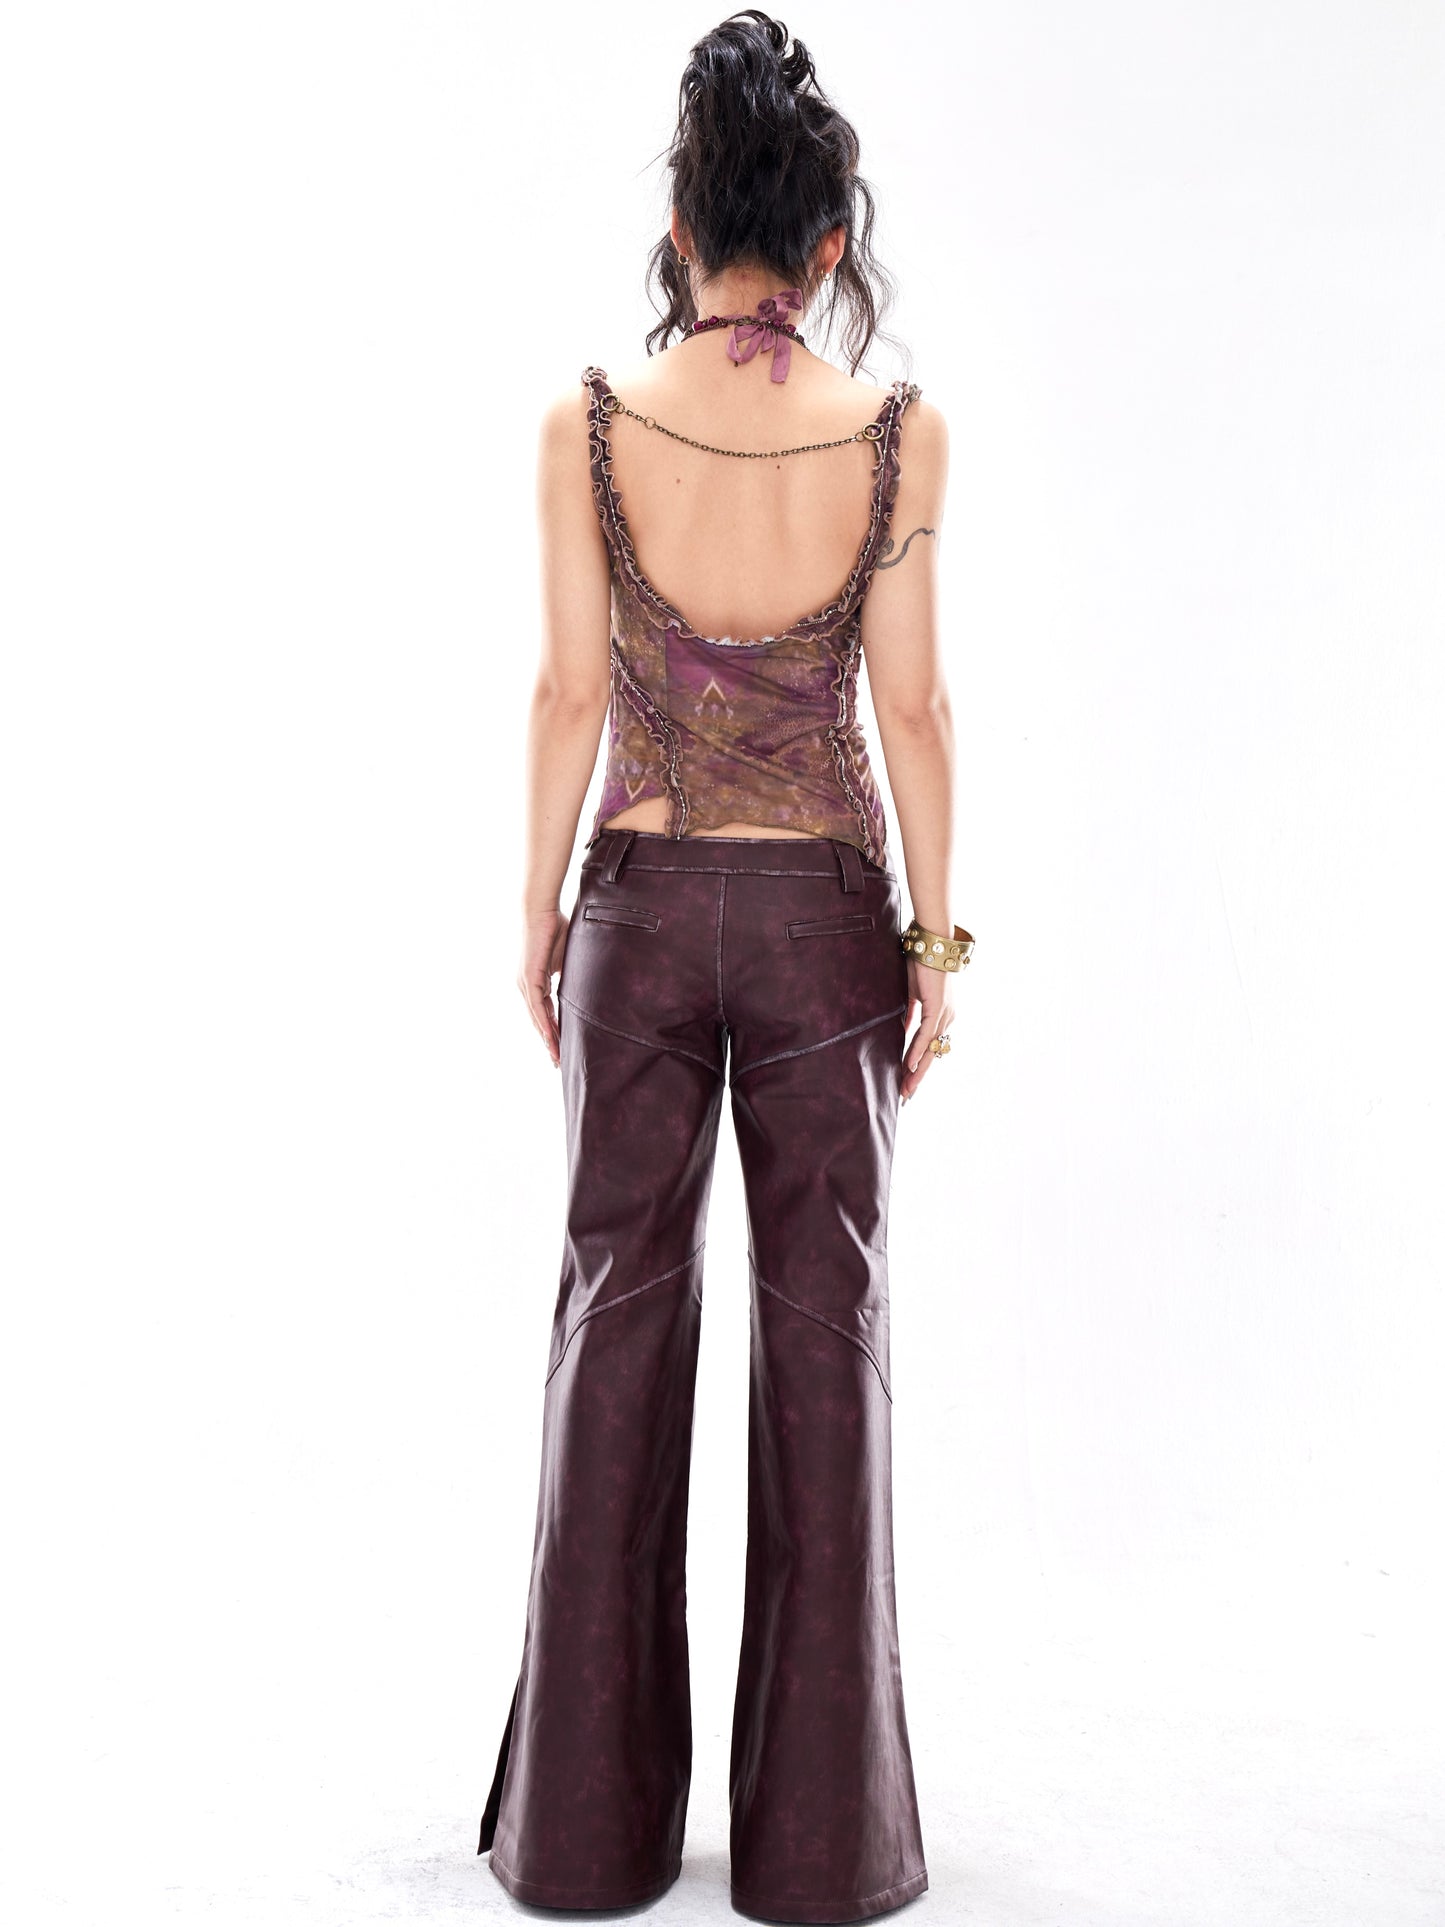 Dark purple heavy made old leather studded flared wide-leg trousers